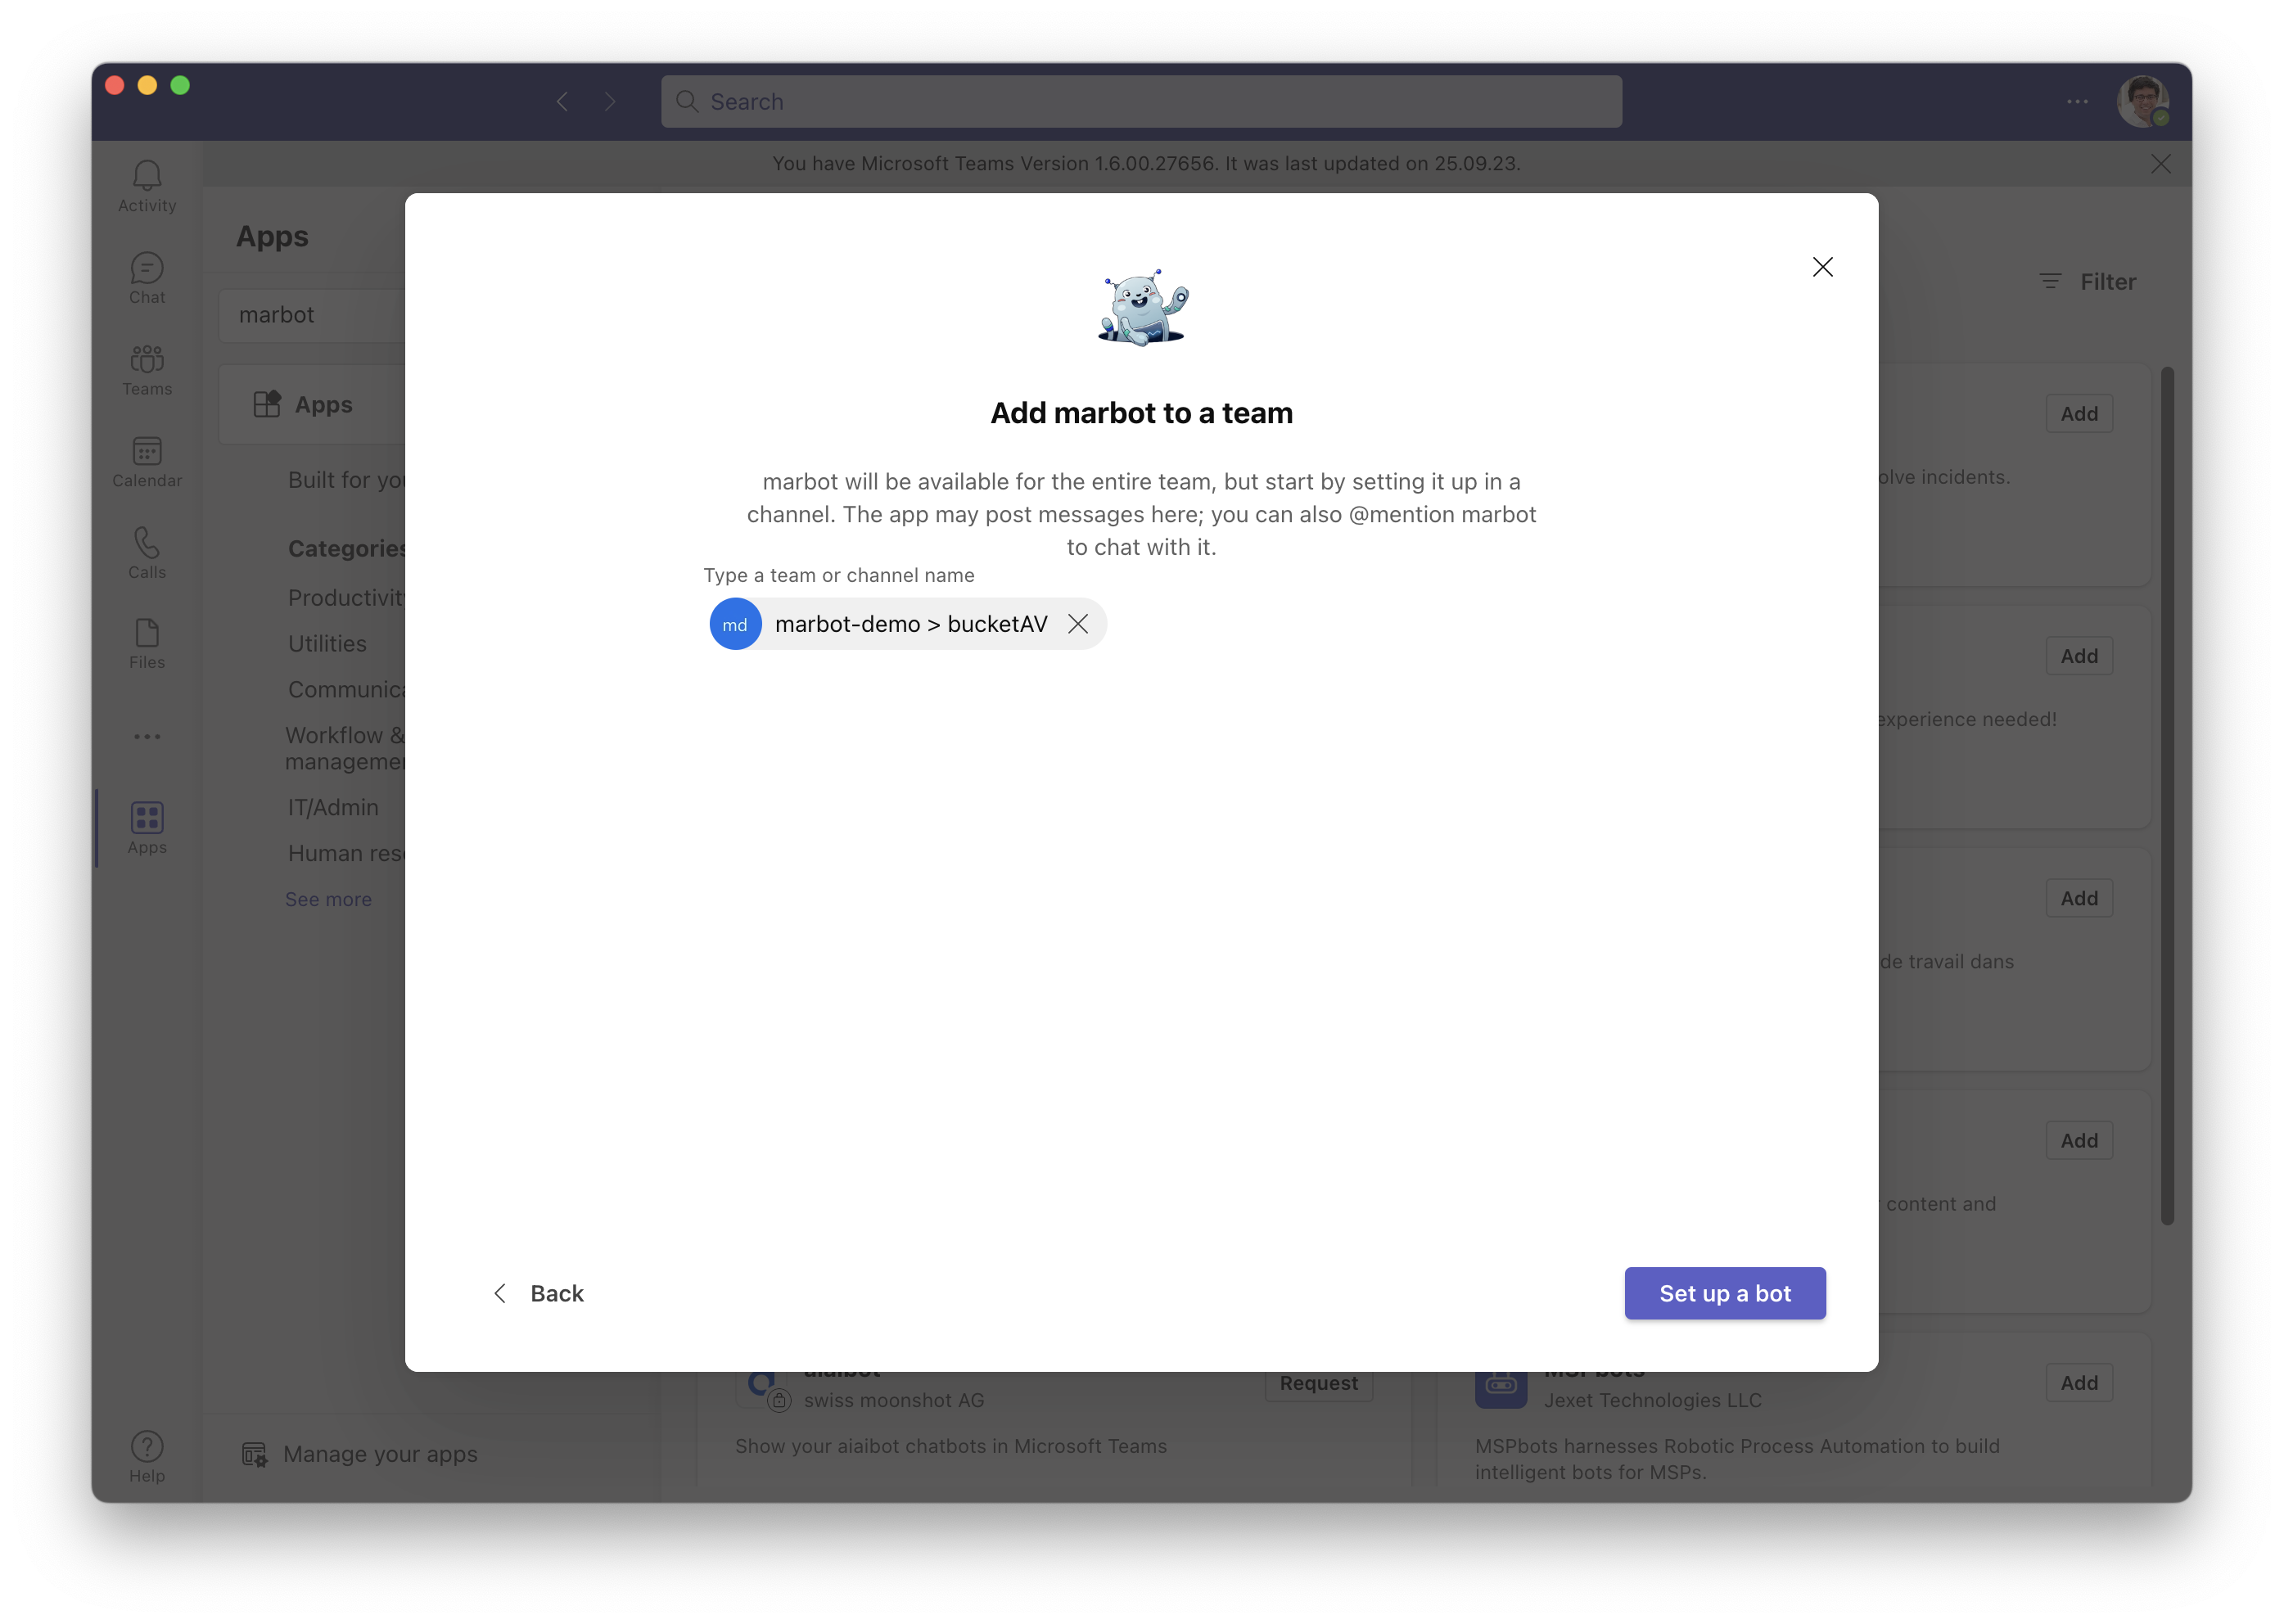 Adding marbot to Microsoft Teams part 2